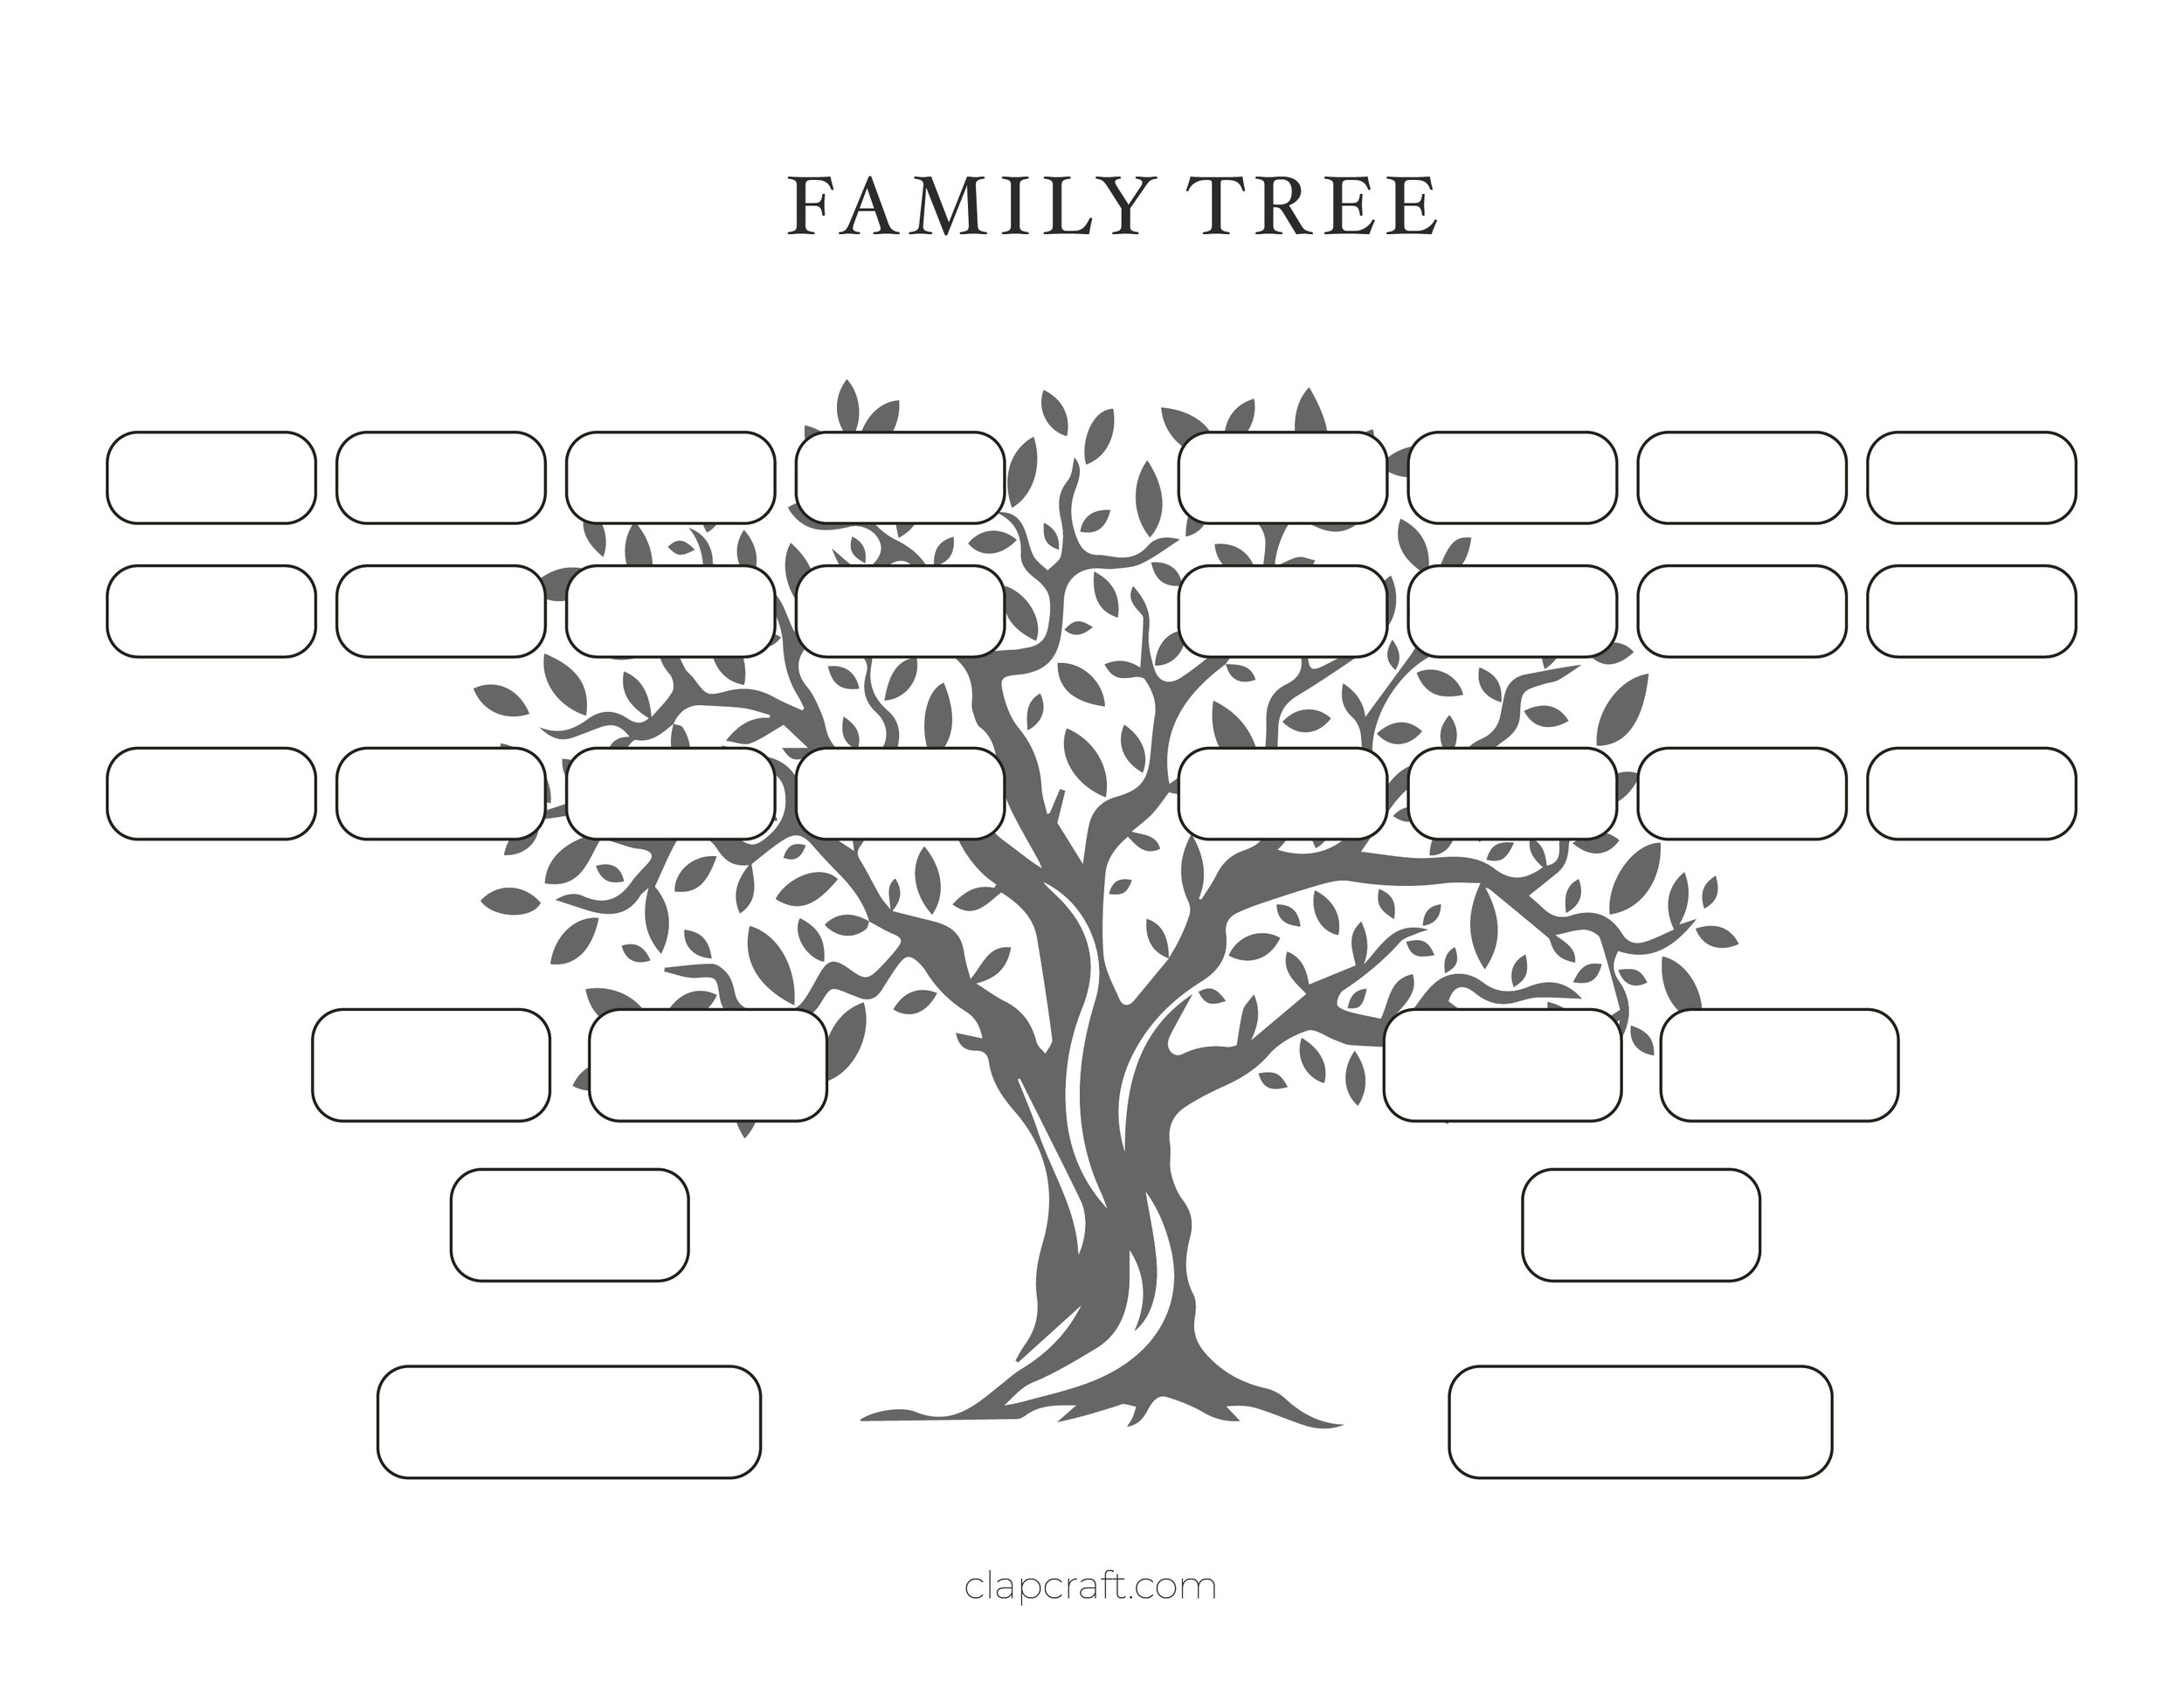 Free Family Tree Templates And Charts — ClapCraft Within Fill In The Blank Family Tree Template